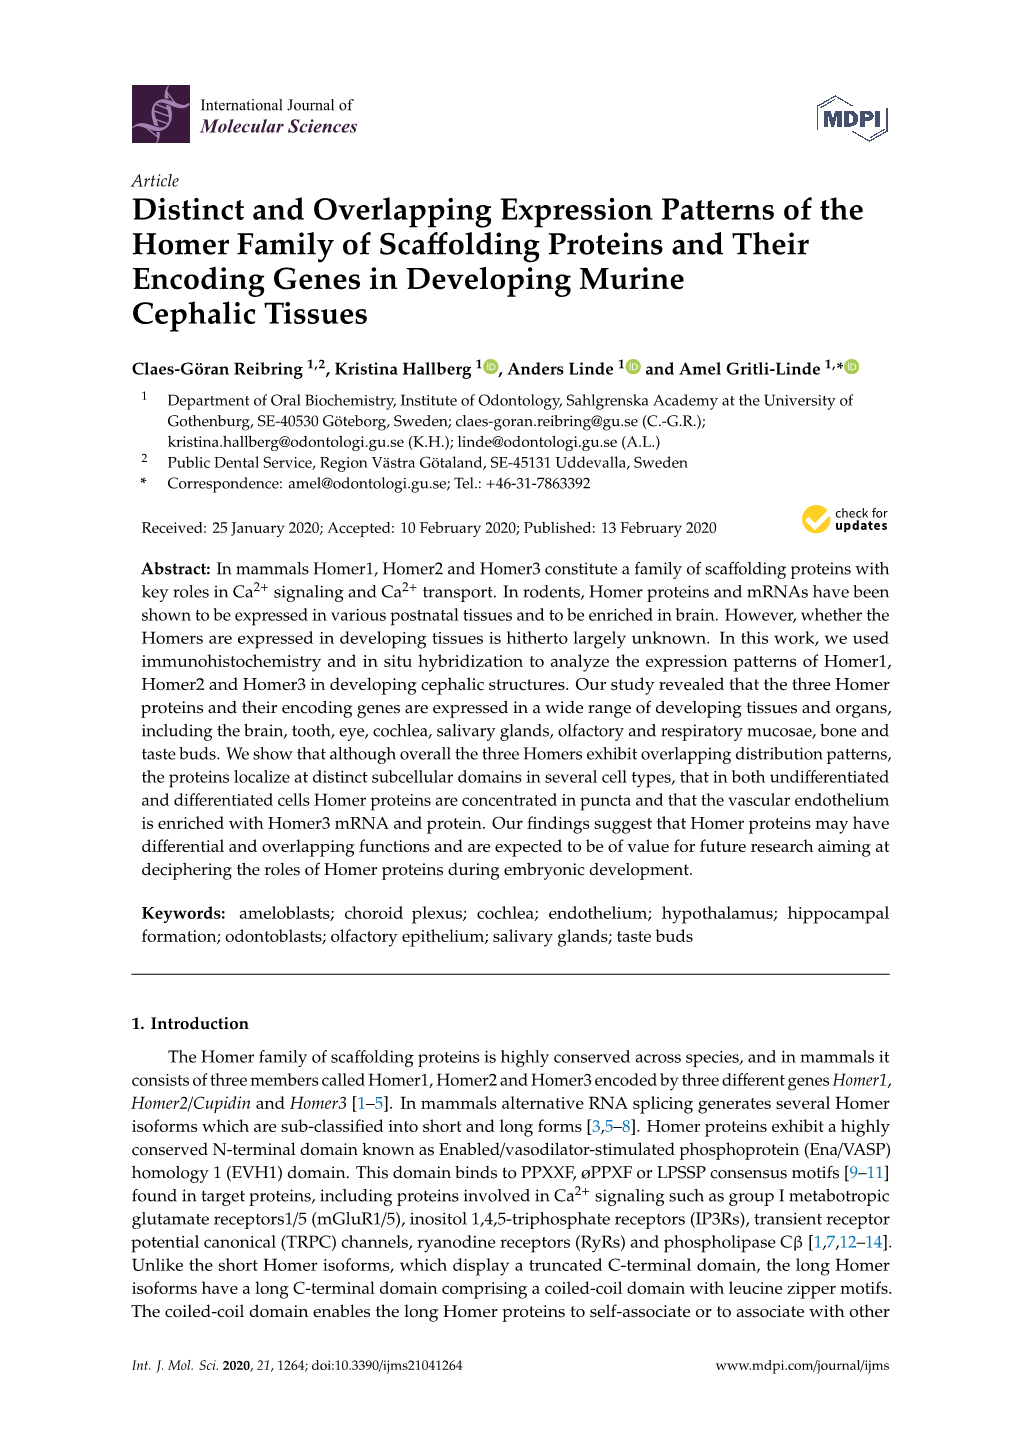 Distinct and Overlapping Expression Patterns of the Homer Family of Scaﬀolding Proteins and Their Encoding Genes in Developing Murine Cephalic Tissues